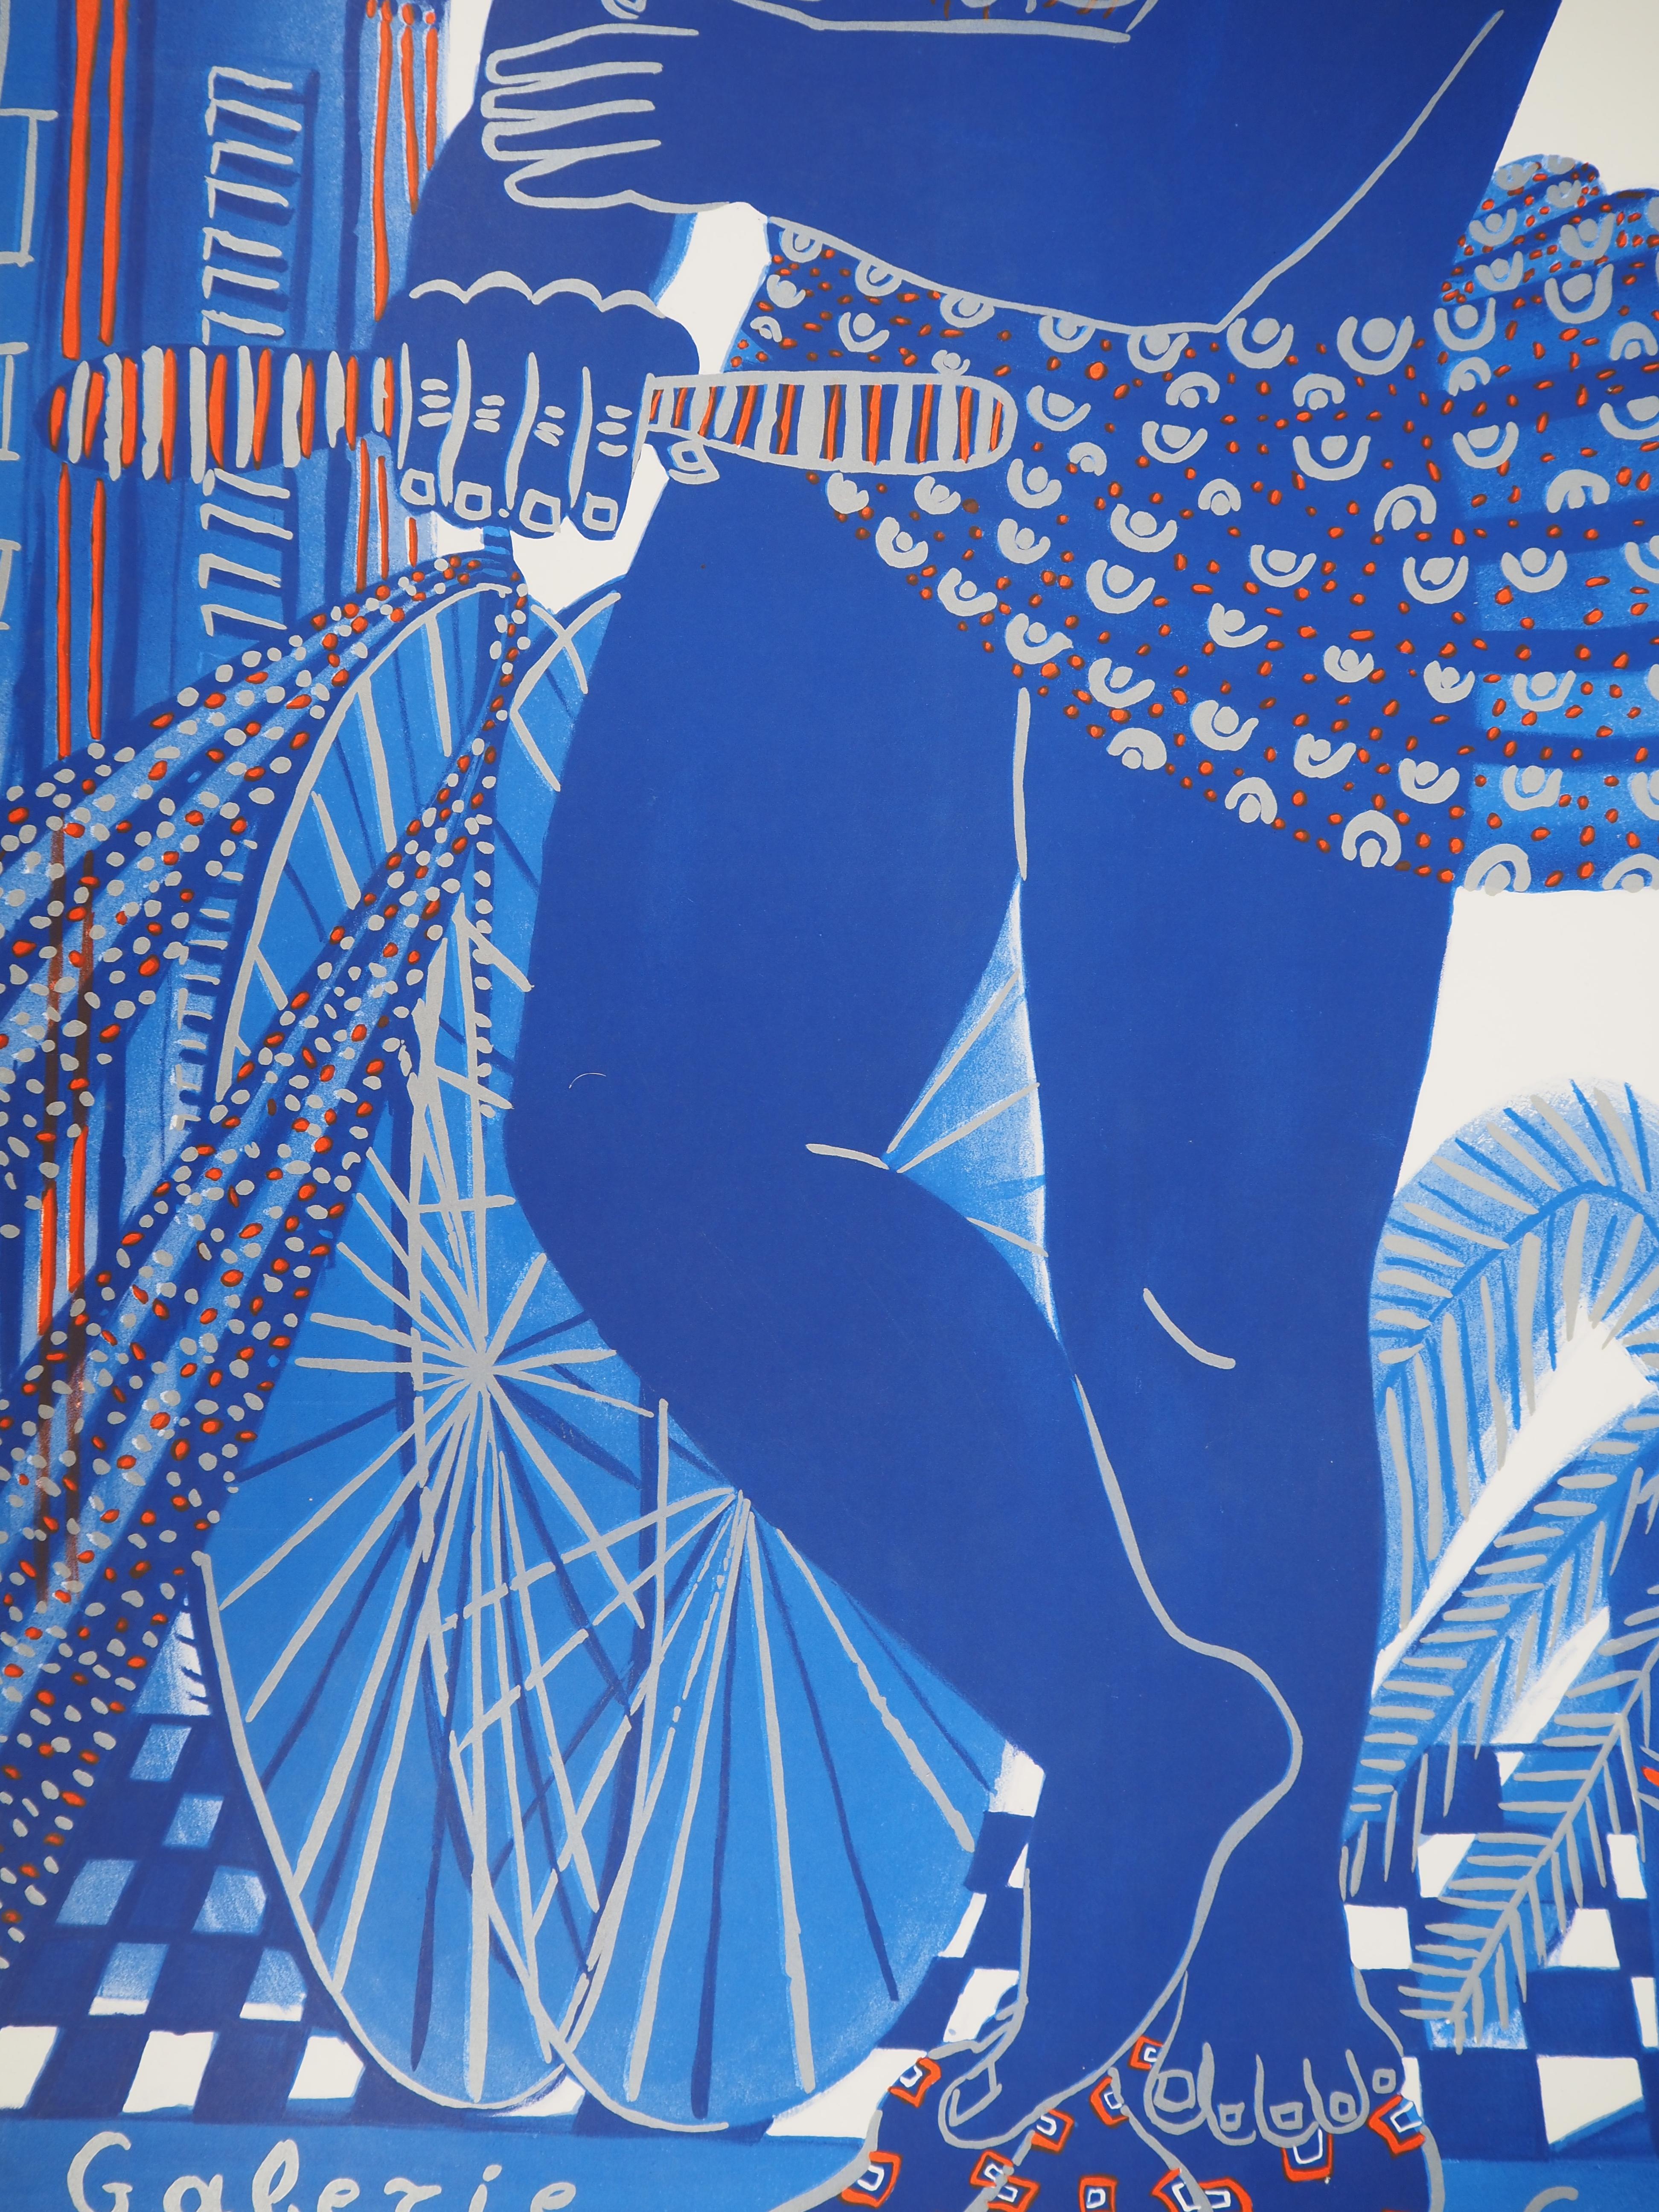 Greece : Man with Bicycle - Original lithograph, 1997 - Blue Figurative Print by Alekos Fassianos